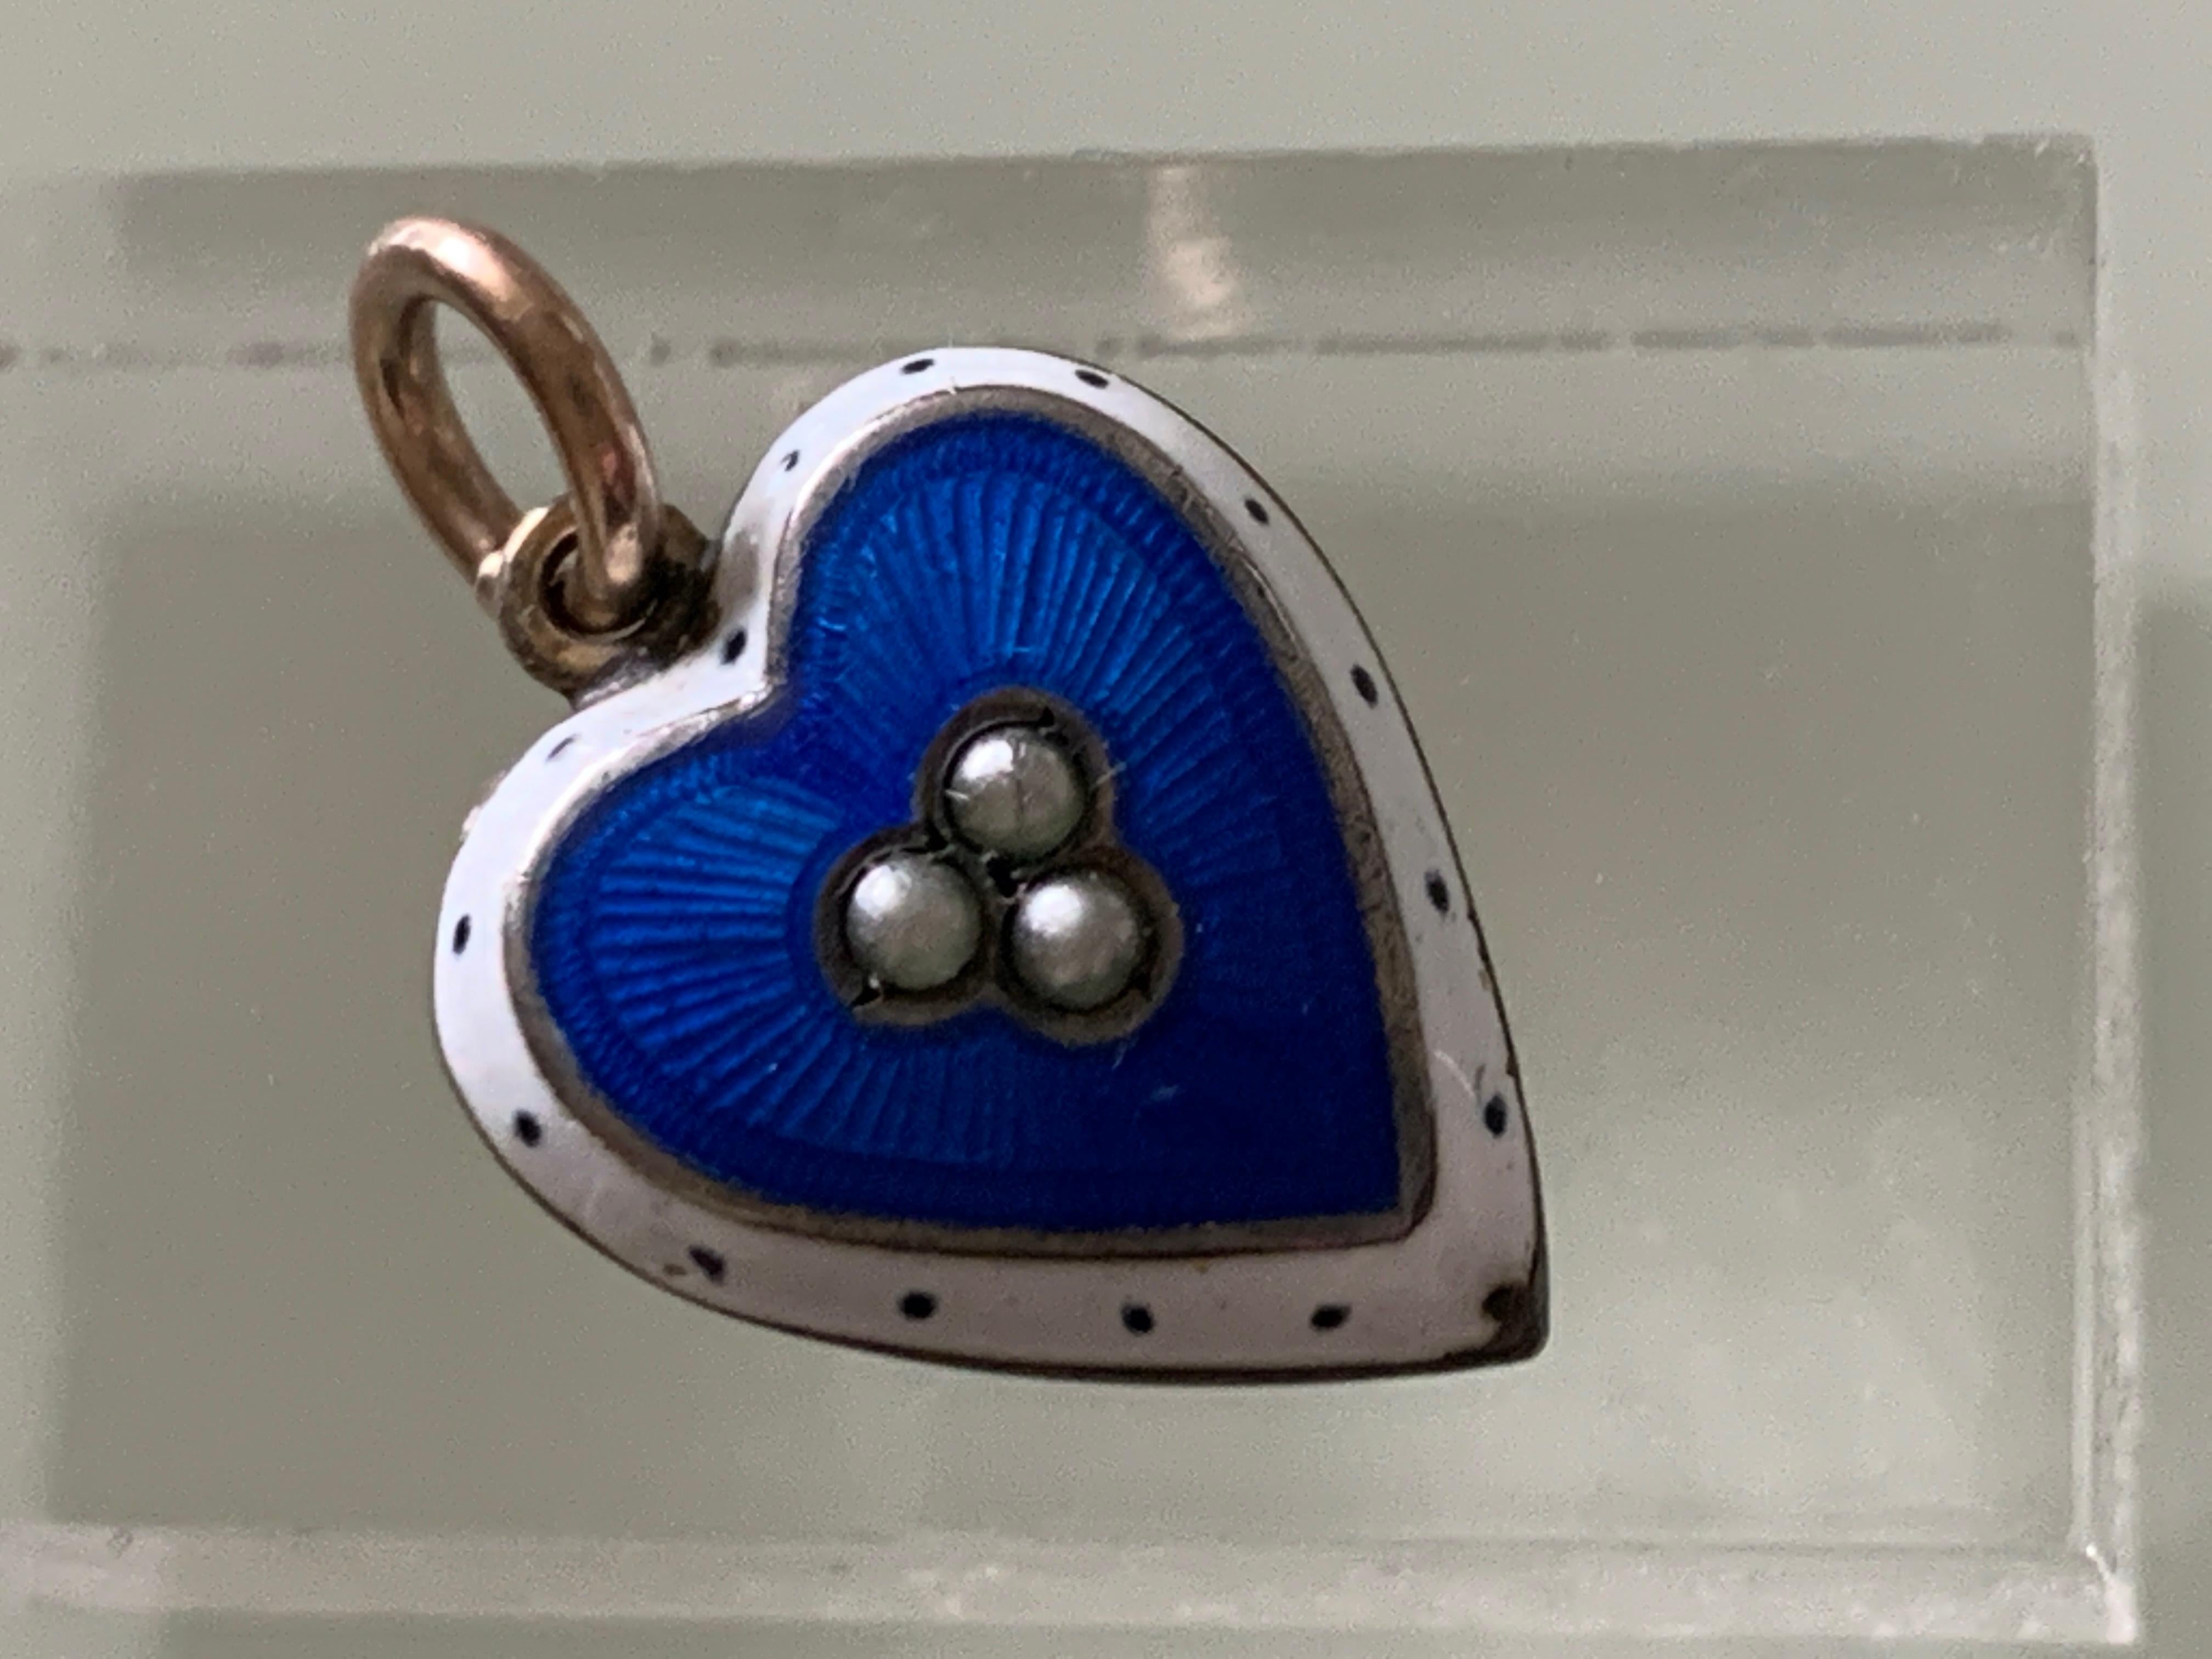 Beautiful
Antique Edwardian 9ct Gold Heart
with front cobalt blue and dotted enamel
in very good condition
surrounding three central cultured pearls
Weight 1.78 grams
Size of heart 1.5 cm  x 1.75 cm x 0.4 cm 

Condition details :
Please note 
A. One